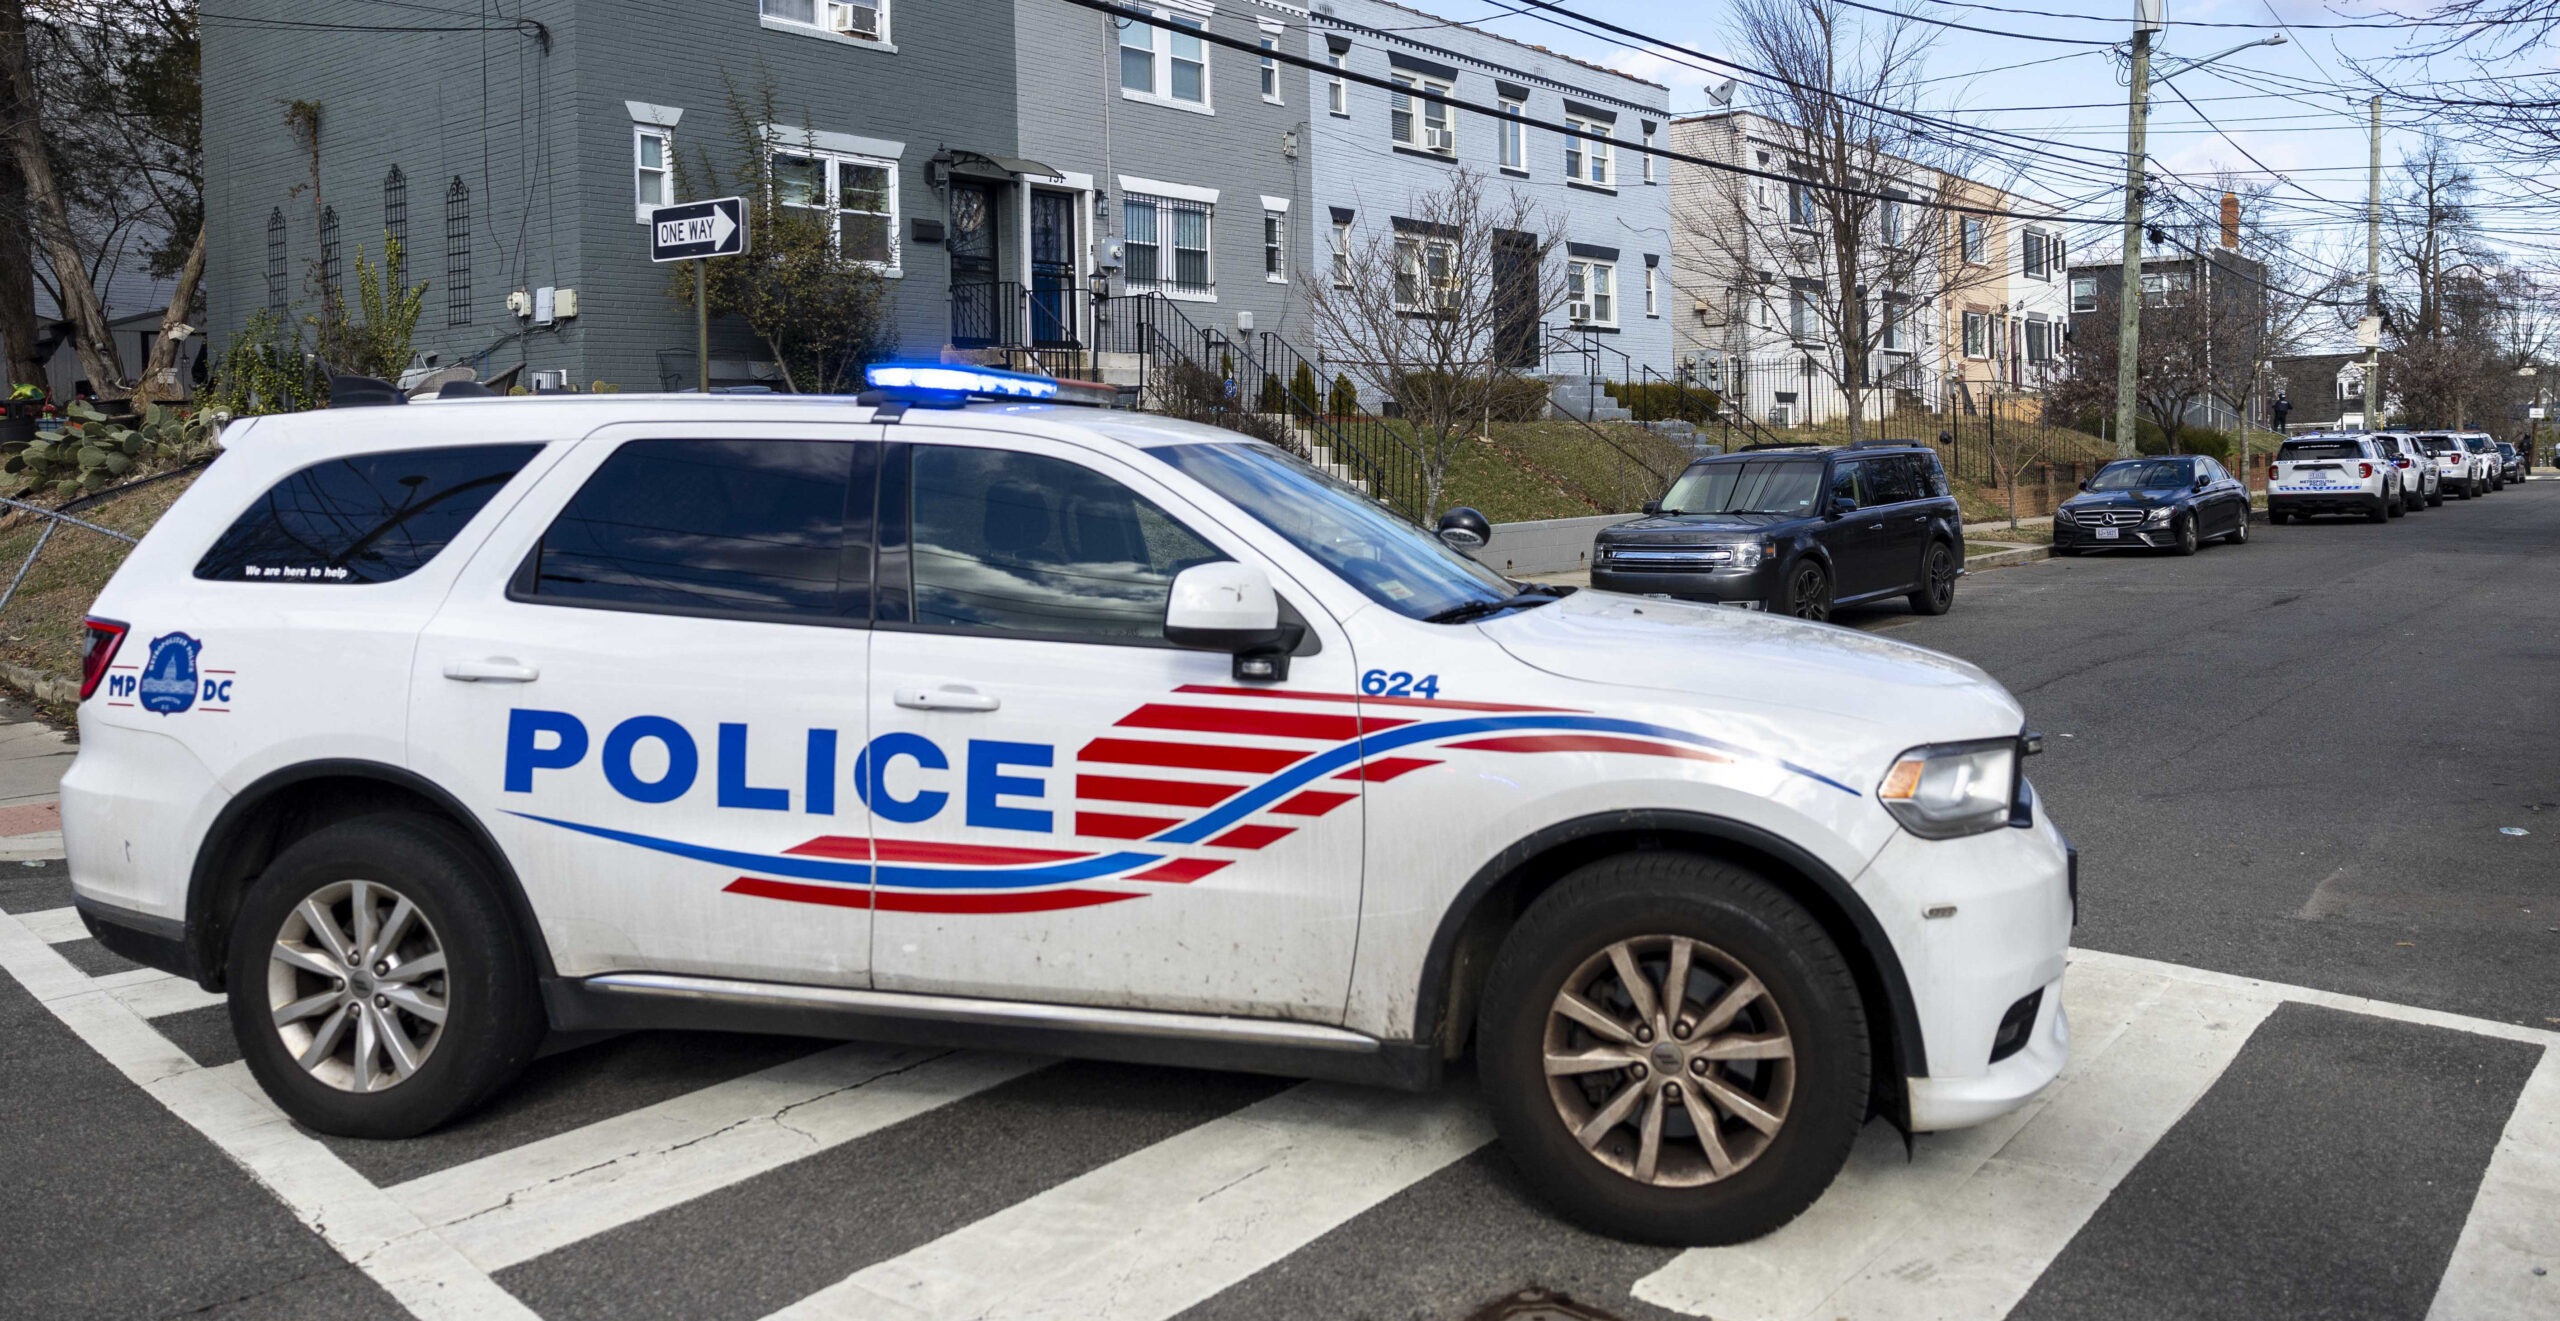 Here's How DC Created a Carjacking Crisis According to Crime Expert